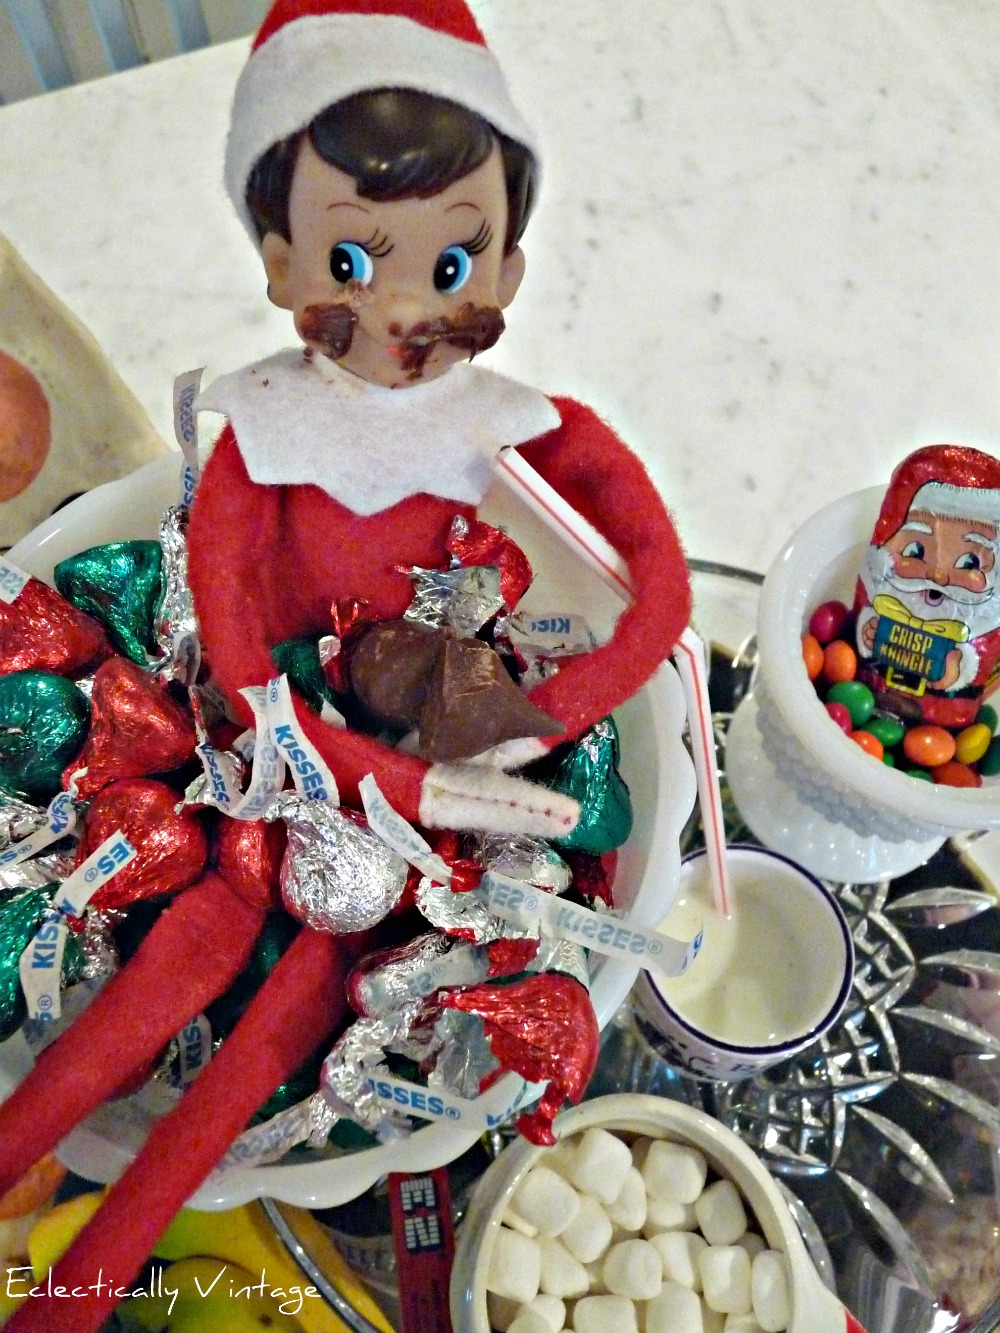 More Hi-Jinx From Elf on the Shelf Ideas!